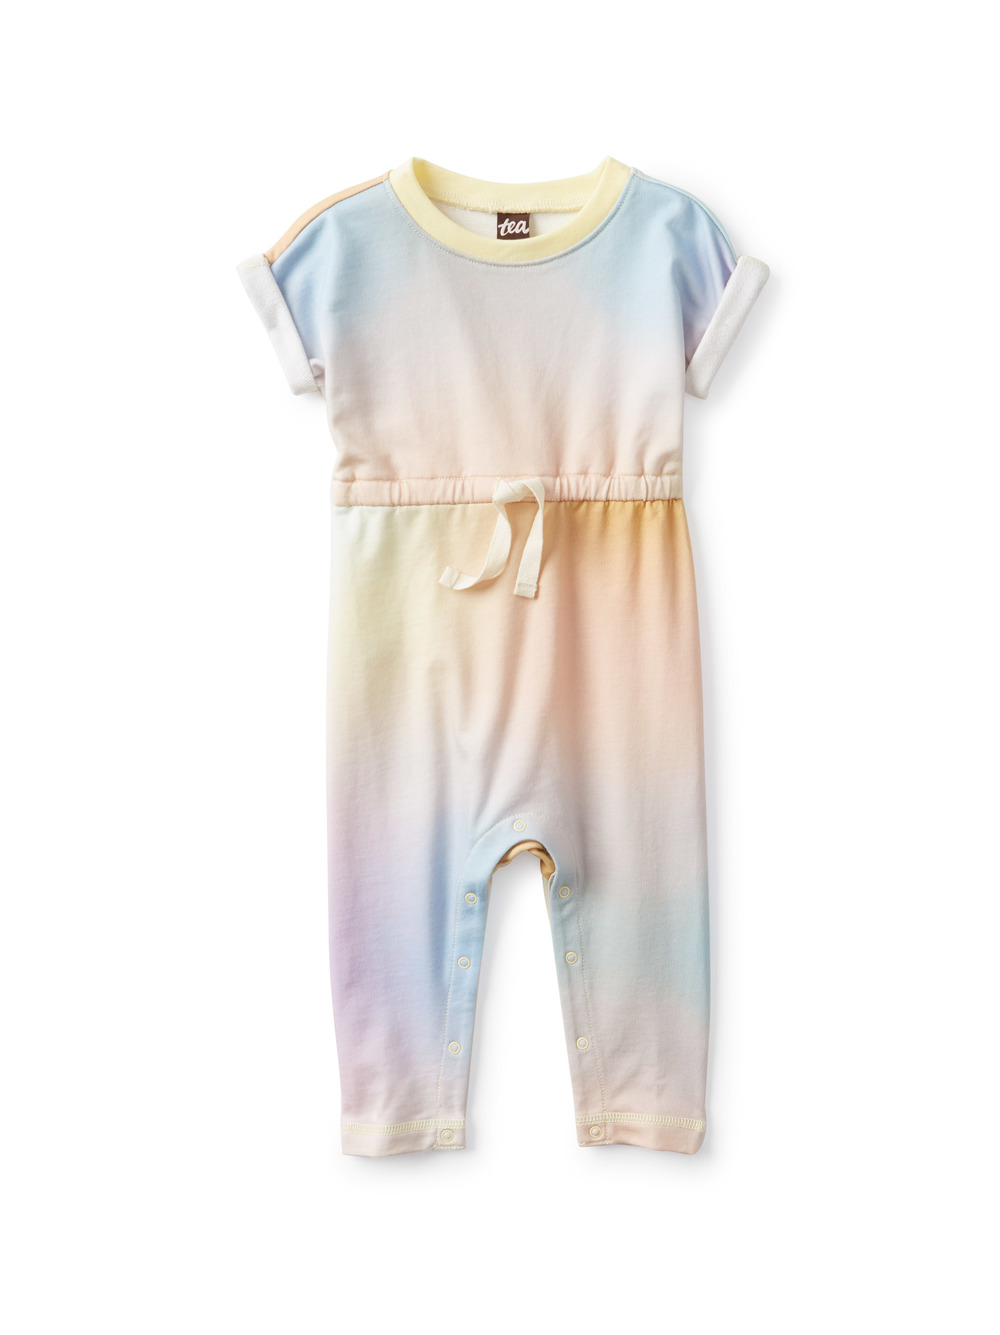 Rolled Sleeve Baby Romper